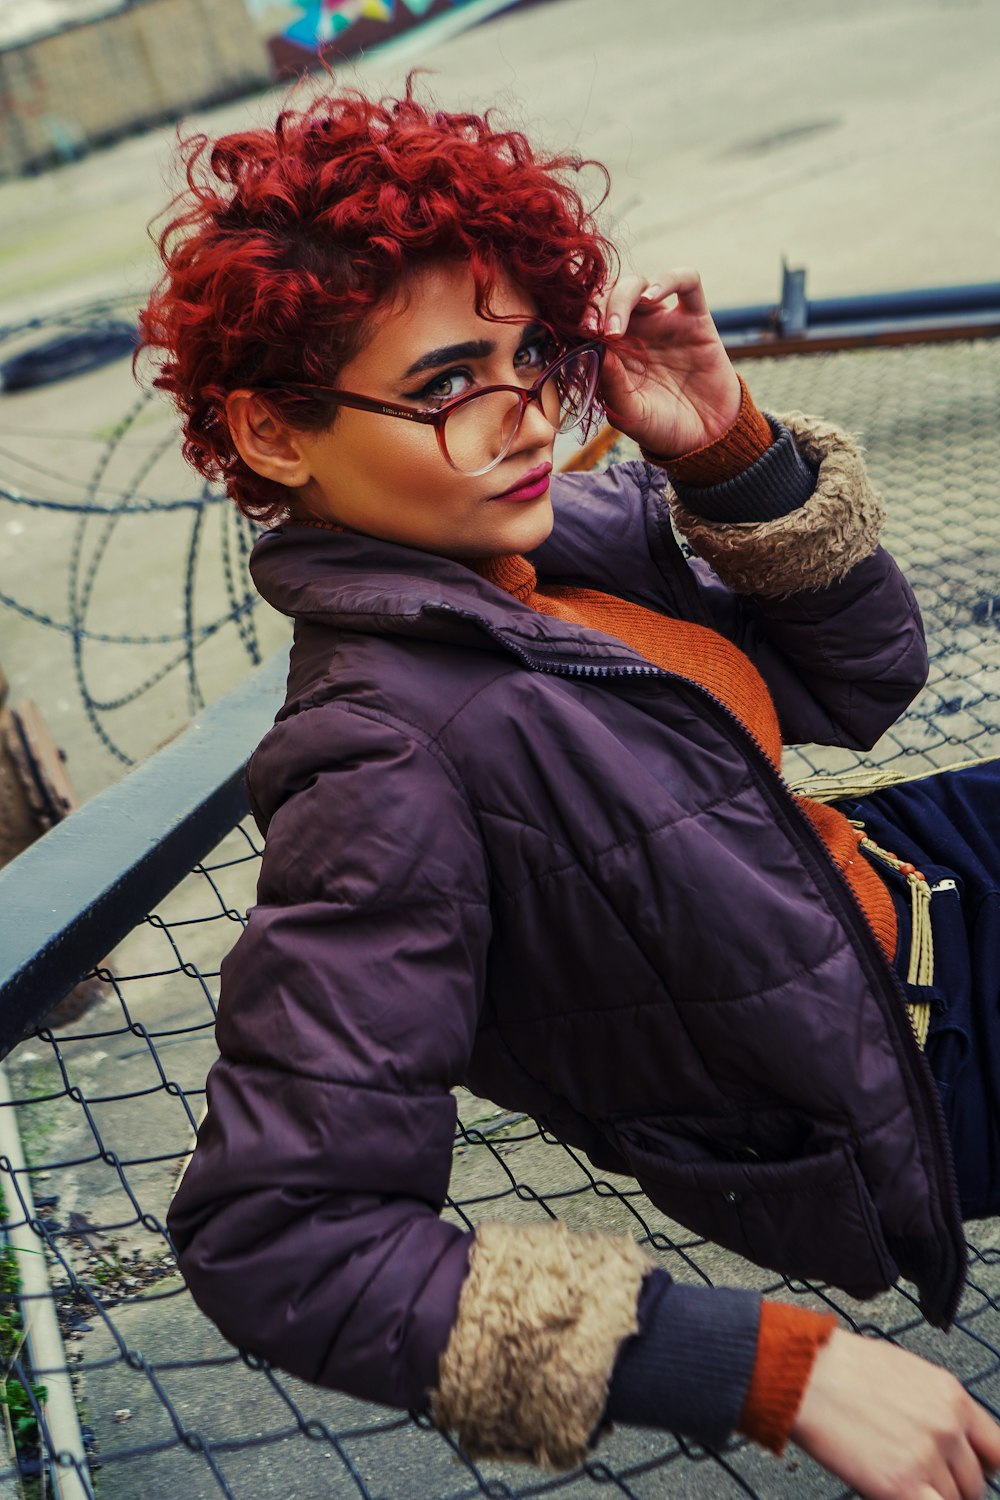 a woman with red hair and glasses sitting on a bench